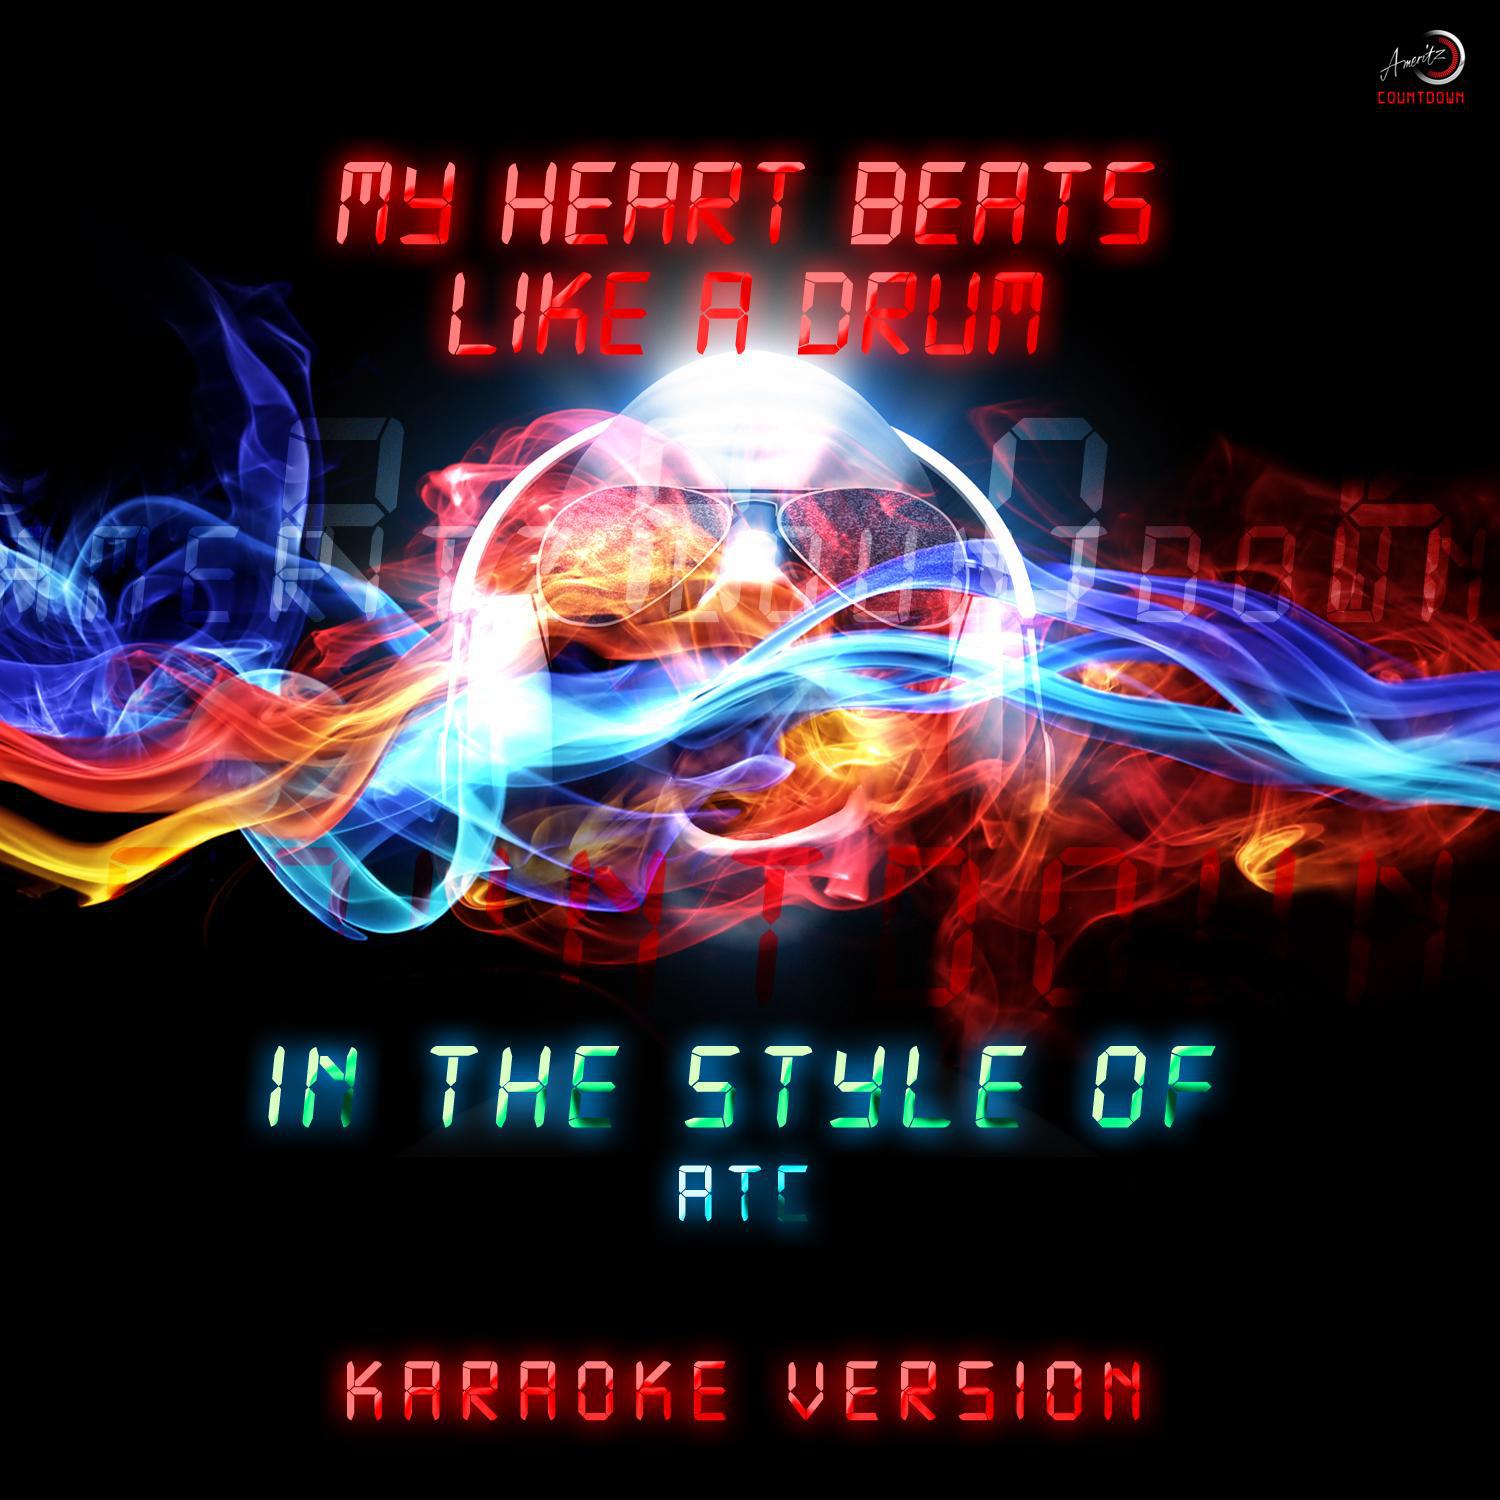 My Heart Beats Like a Drum (In the Style of Atc) [Karaoke Version]